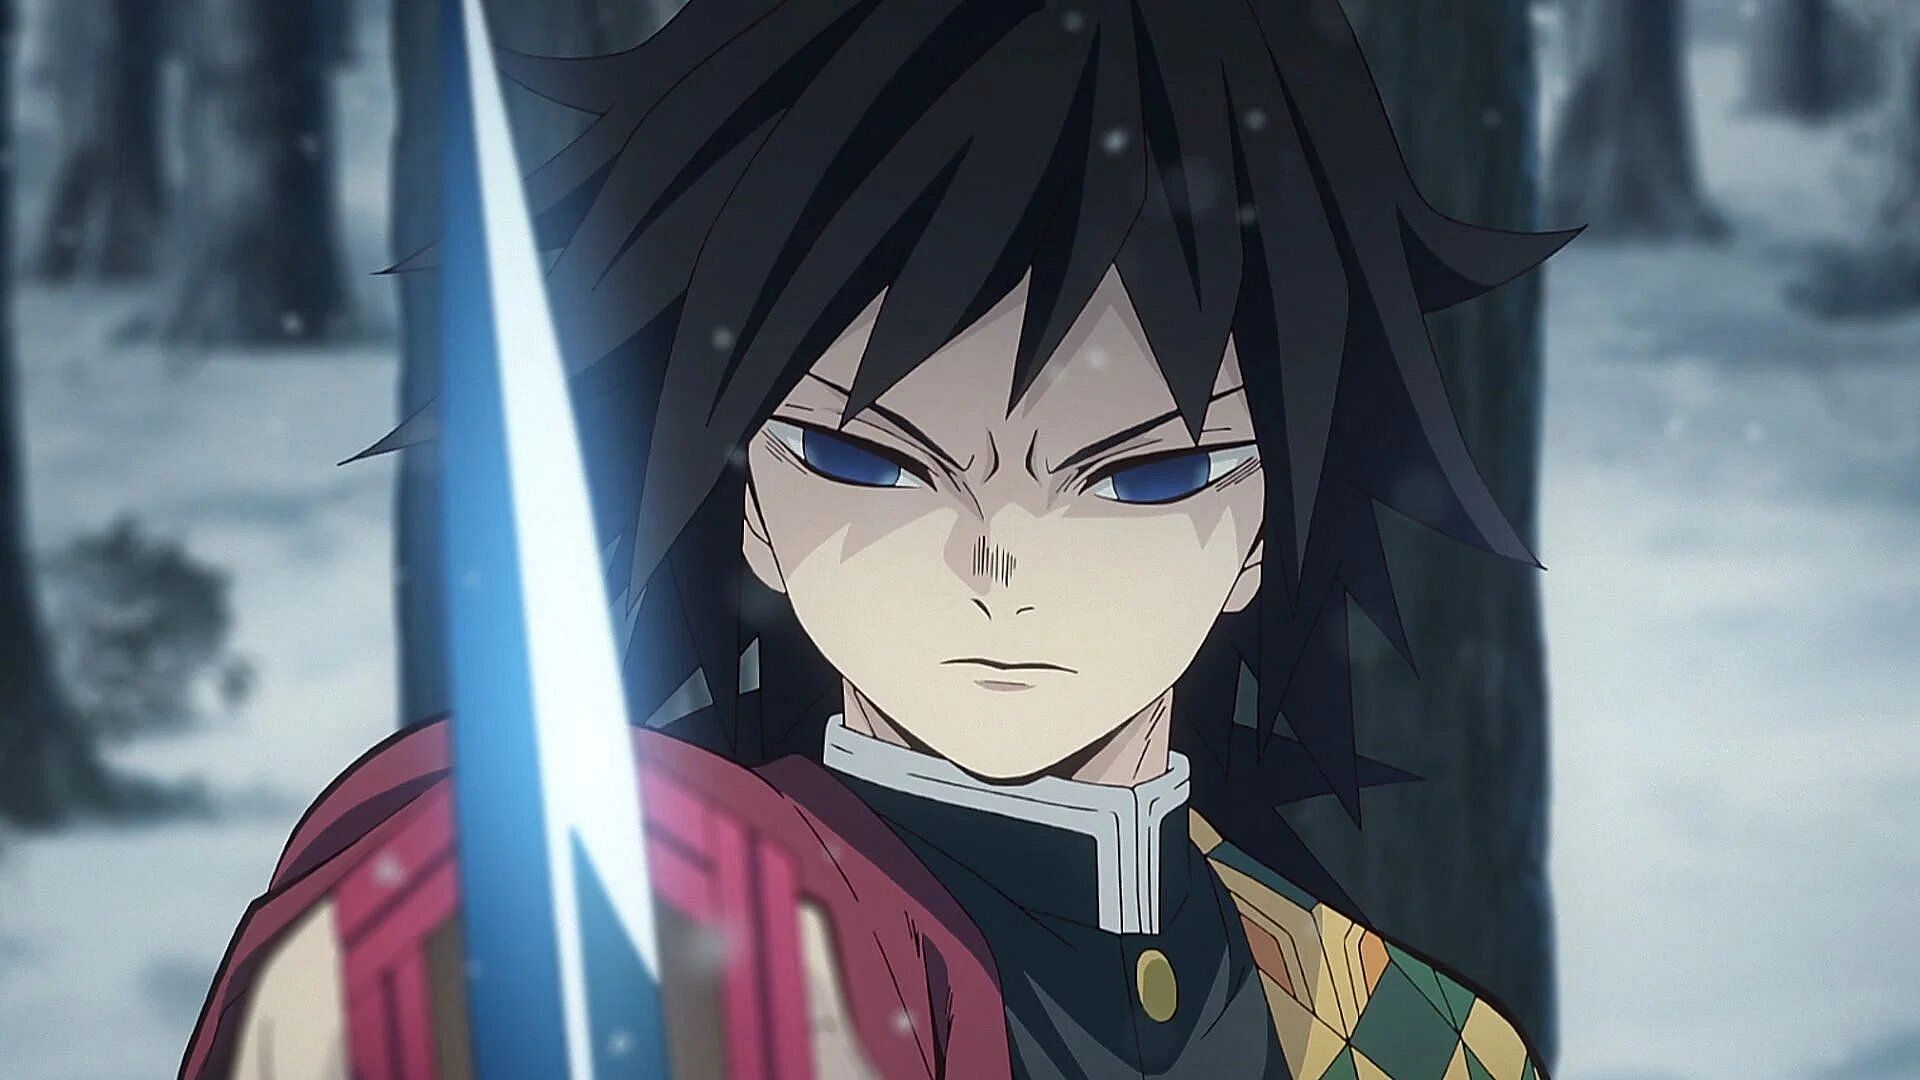 Fans can look forward to Giyu&#039;s backstory and his character development in the upcoming season (Image via Ufotable)